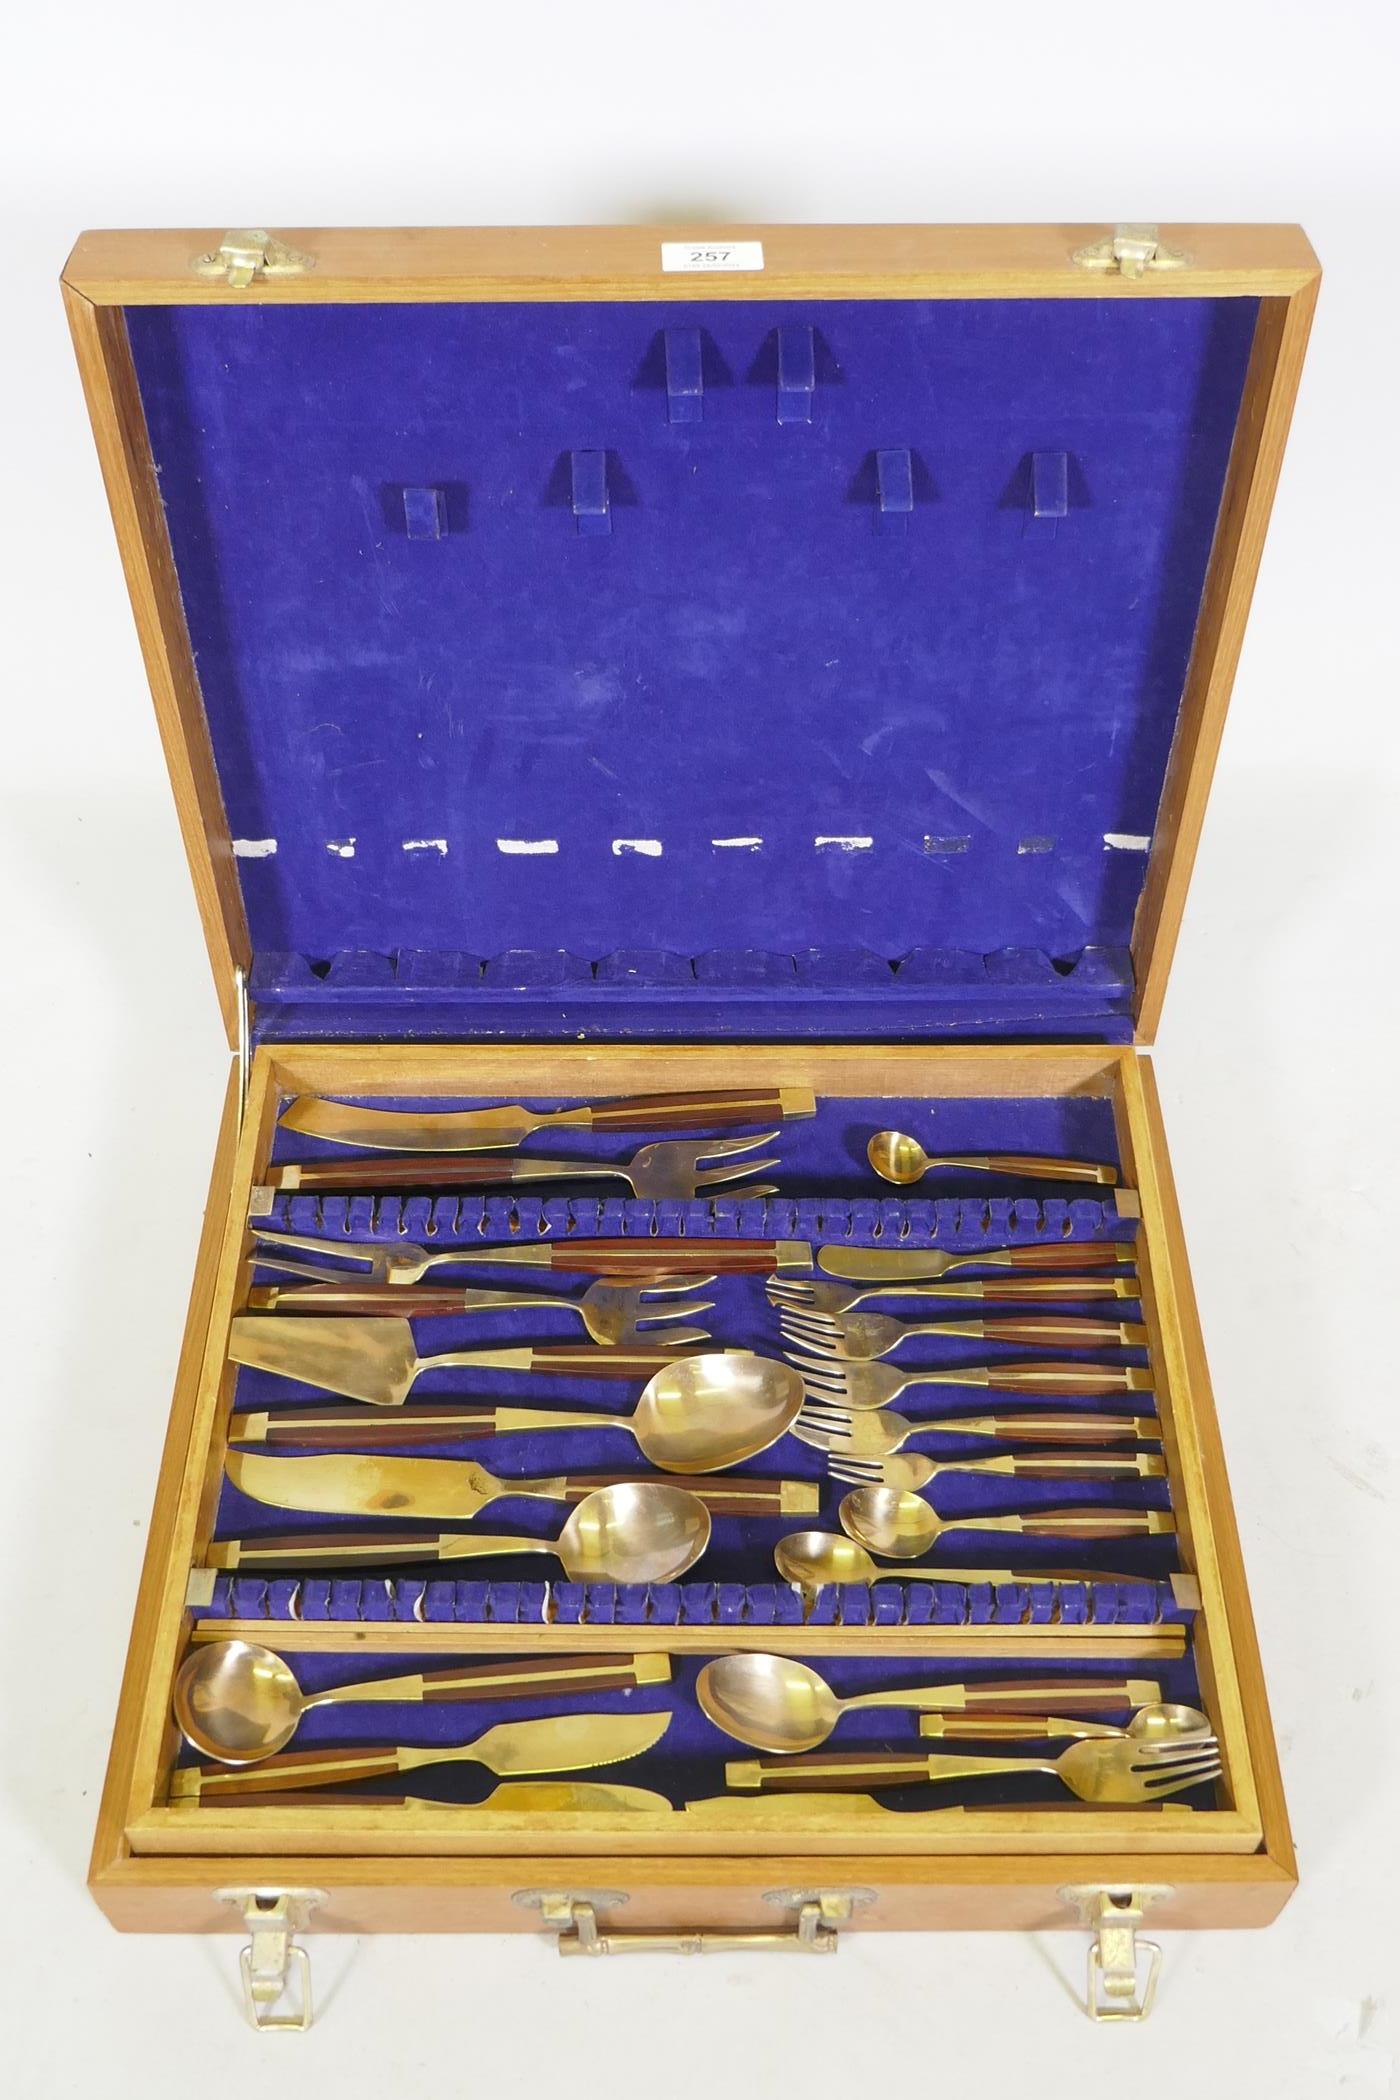 A canteen of brass and rosewood cutlery, probably Thai or Malaysian, 12 place settings